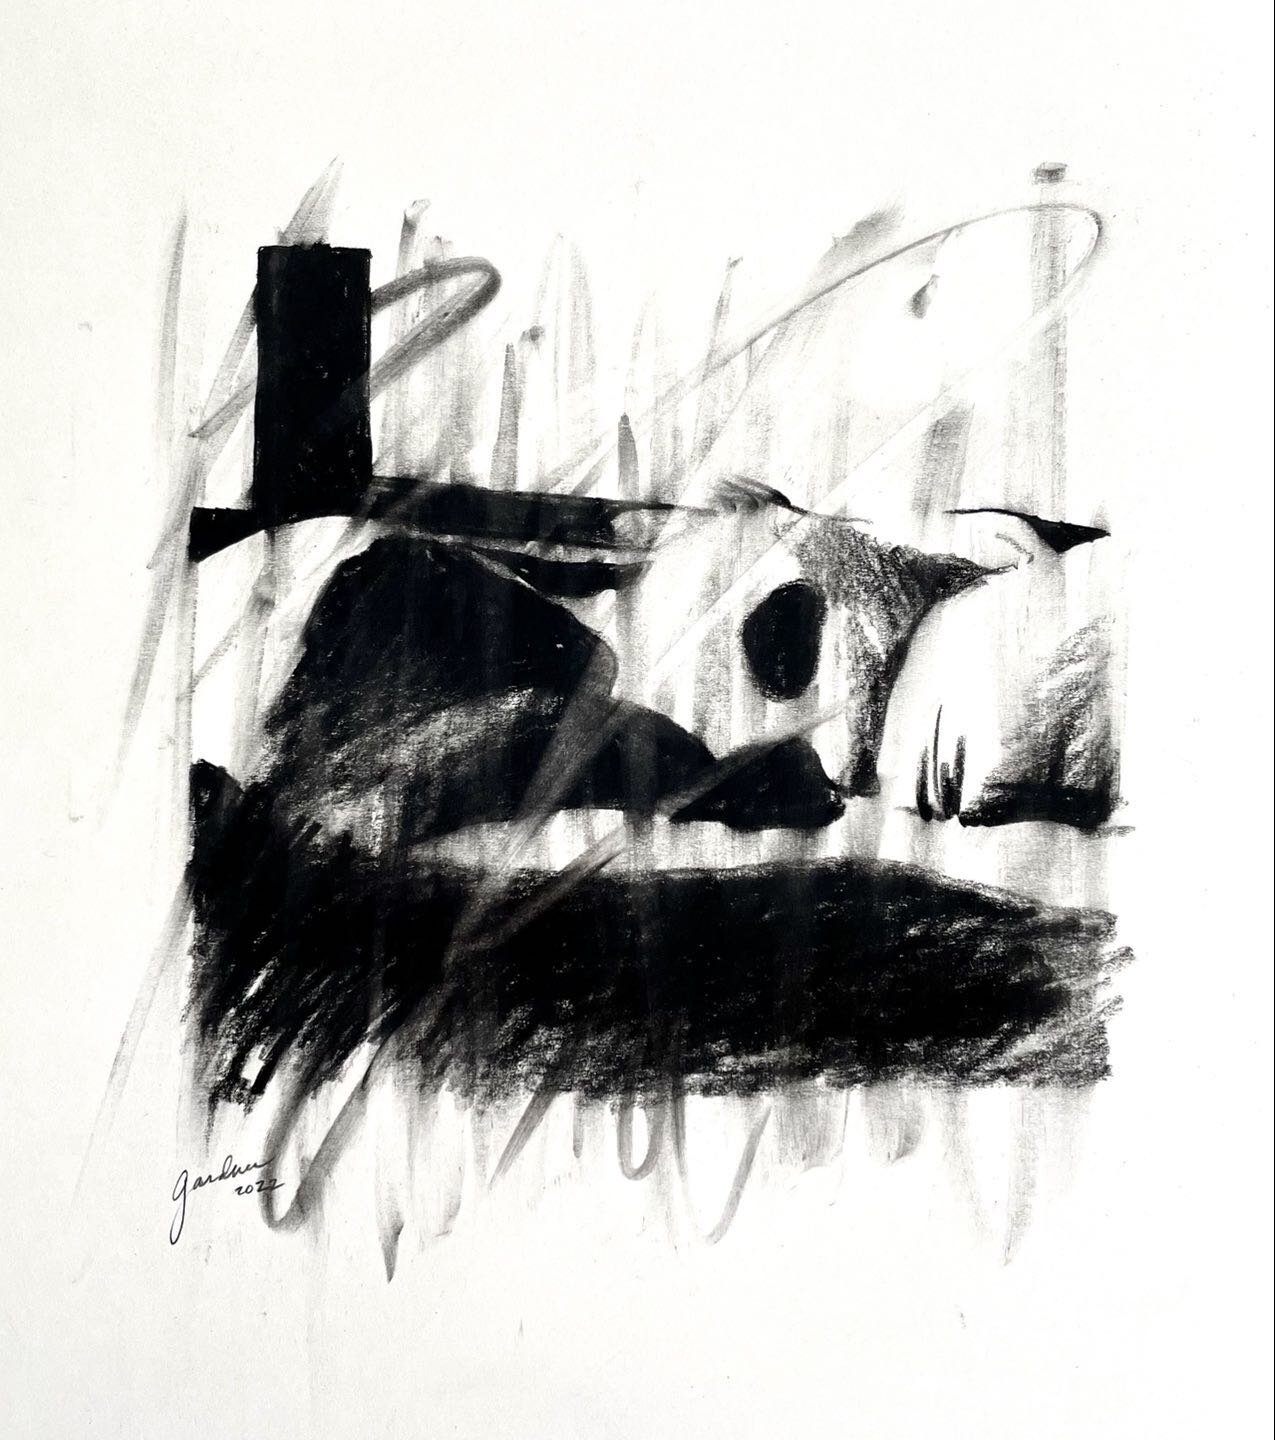 Inside The Corral
charcoal study

#drawing #art